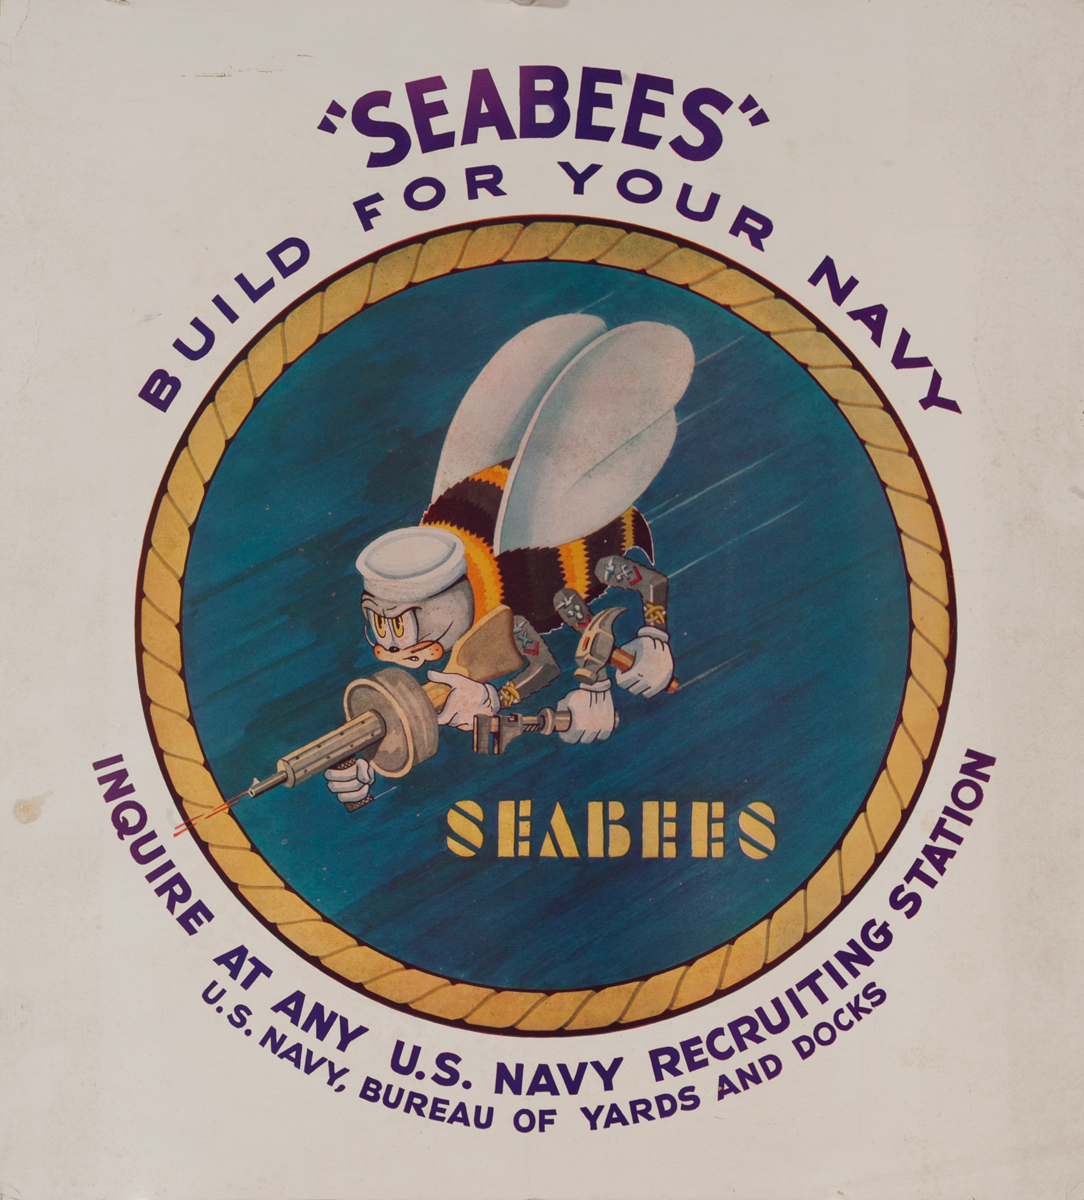 Seabees Build For Your Navy Original American WWII Recruiting Poster